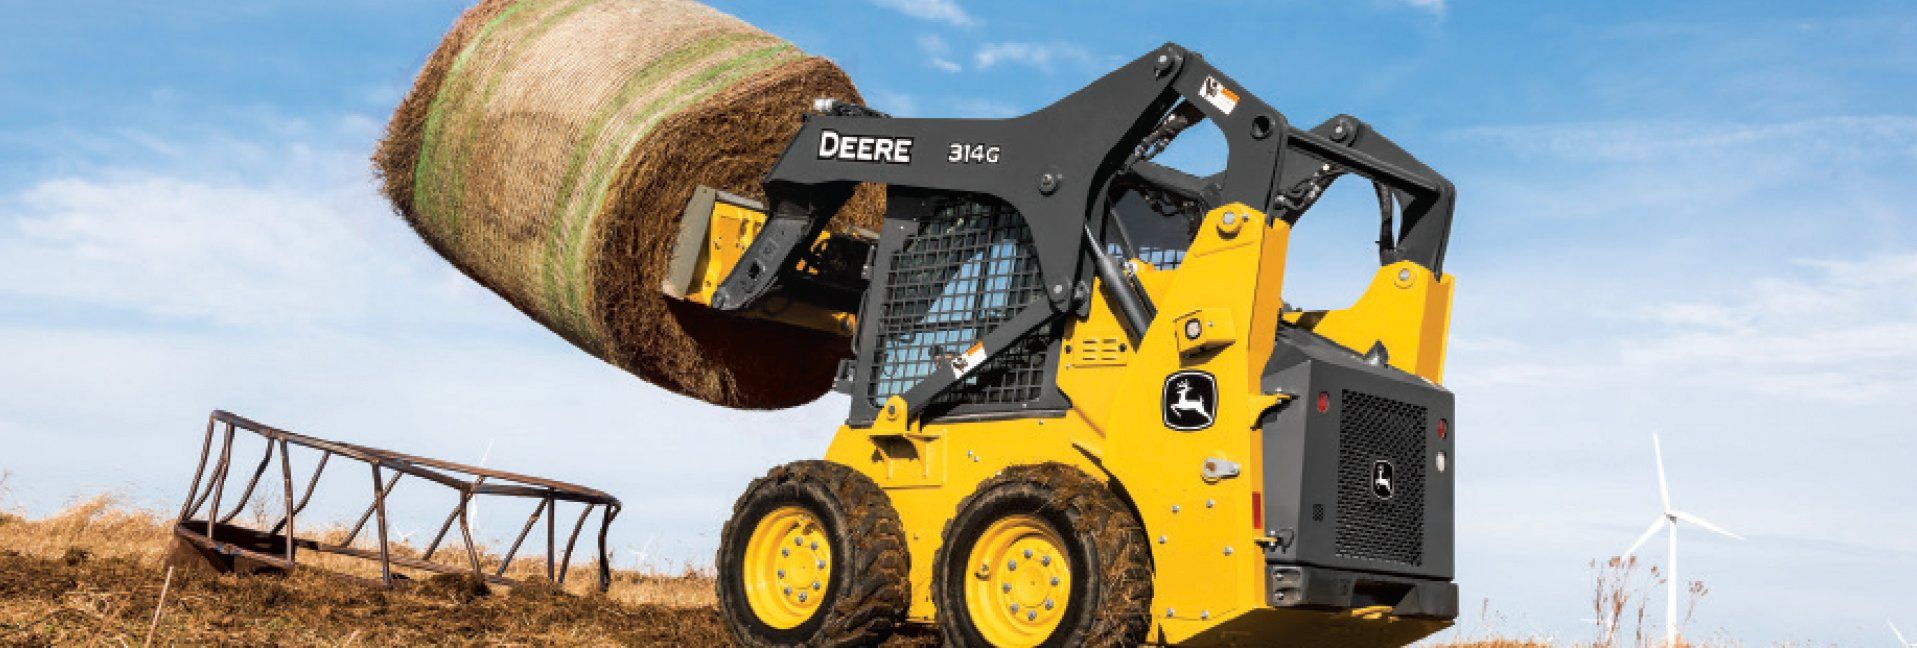 Skid steer loaders really can do it all